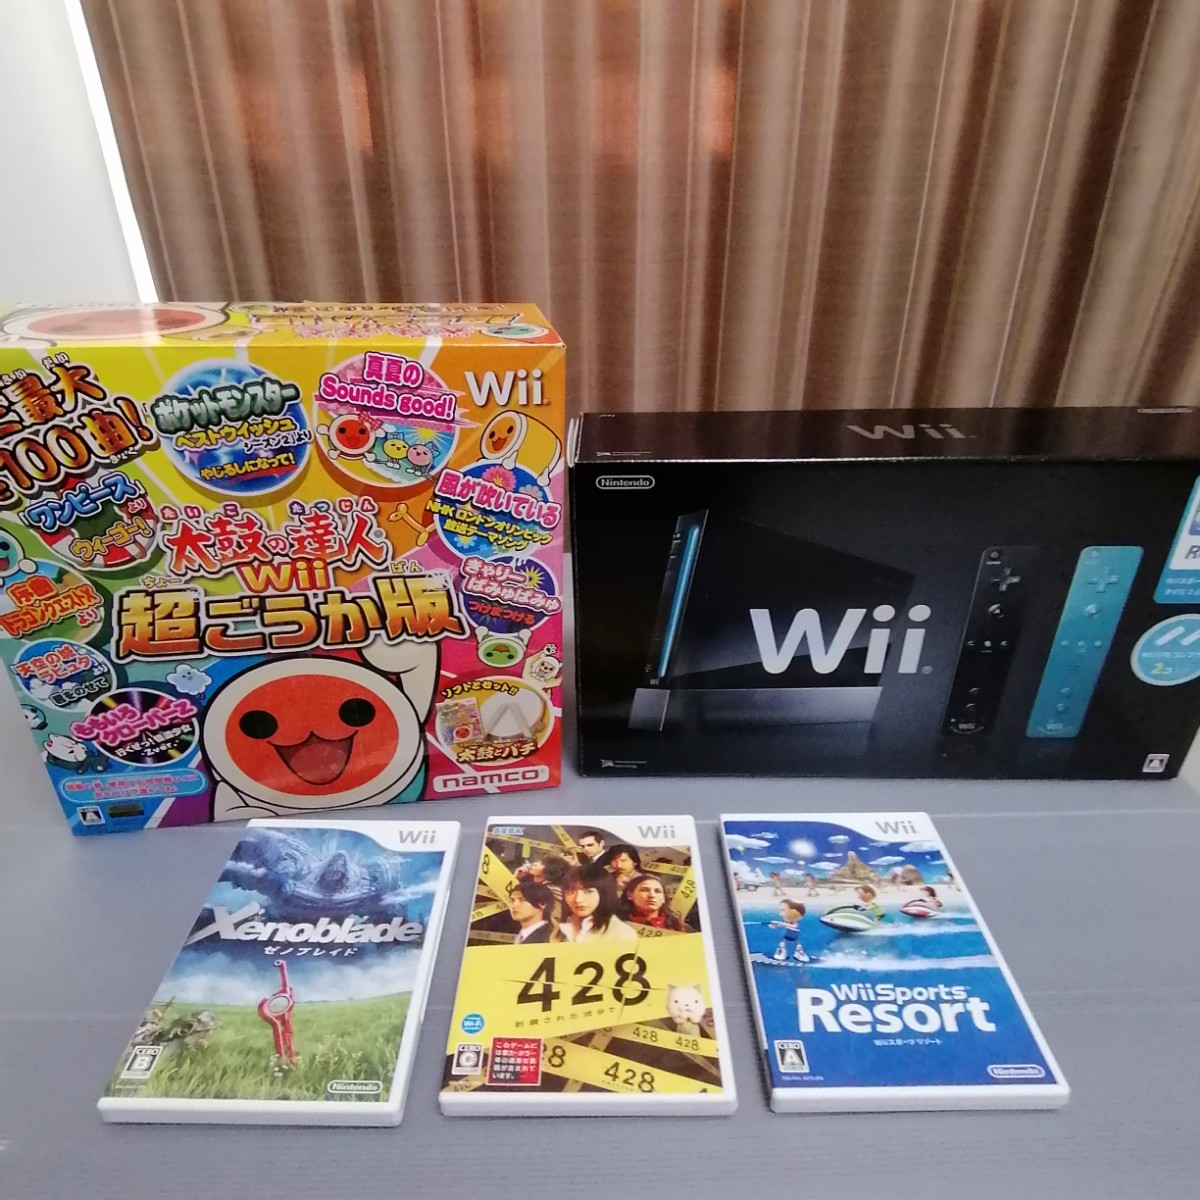 Wii本体 クロ 専用コントローラ Wiiリモコンプラス2本 Wiiスポーツリゾート＋ソフト4本